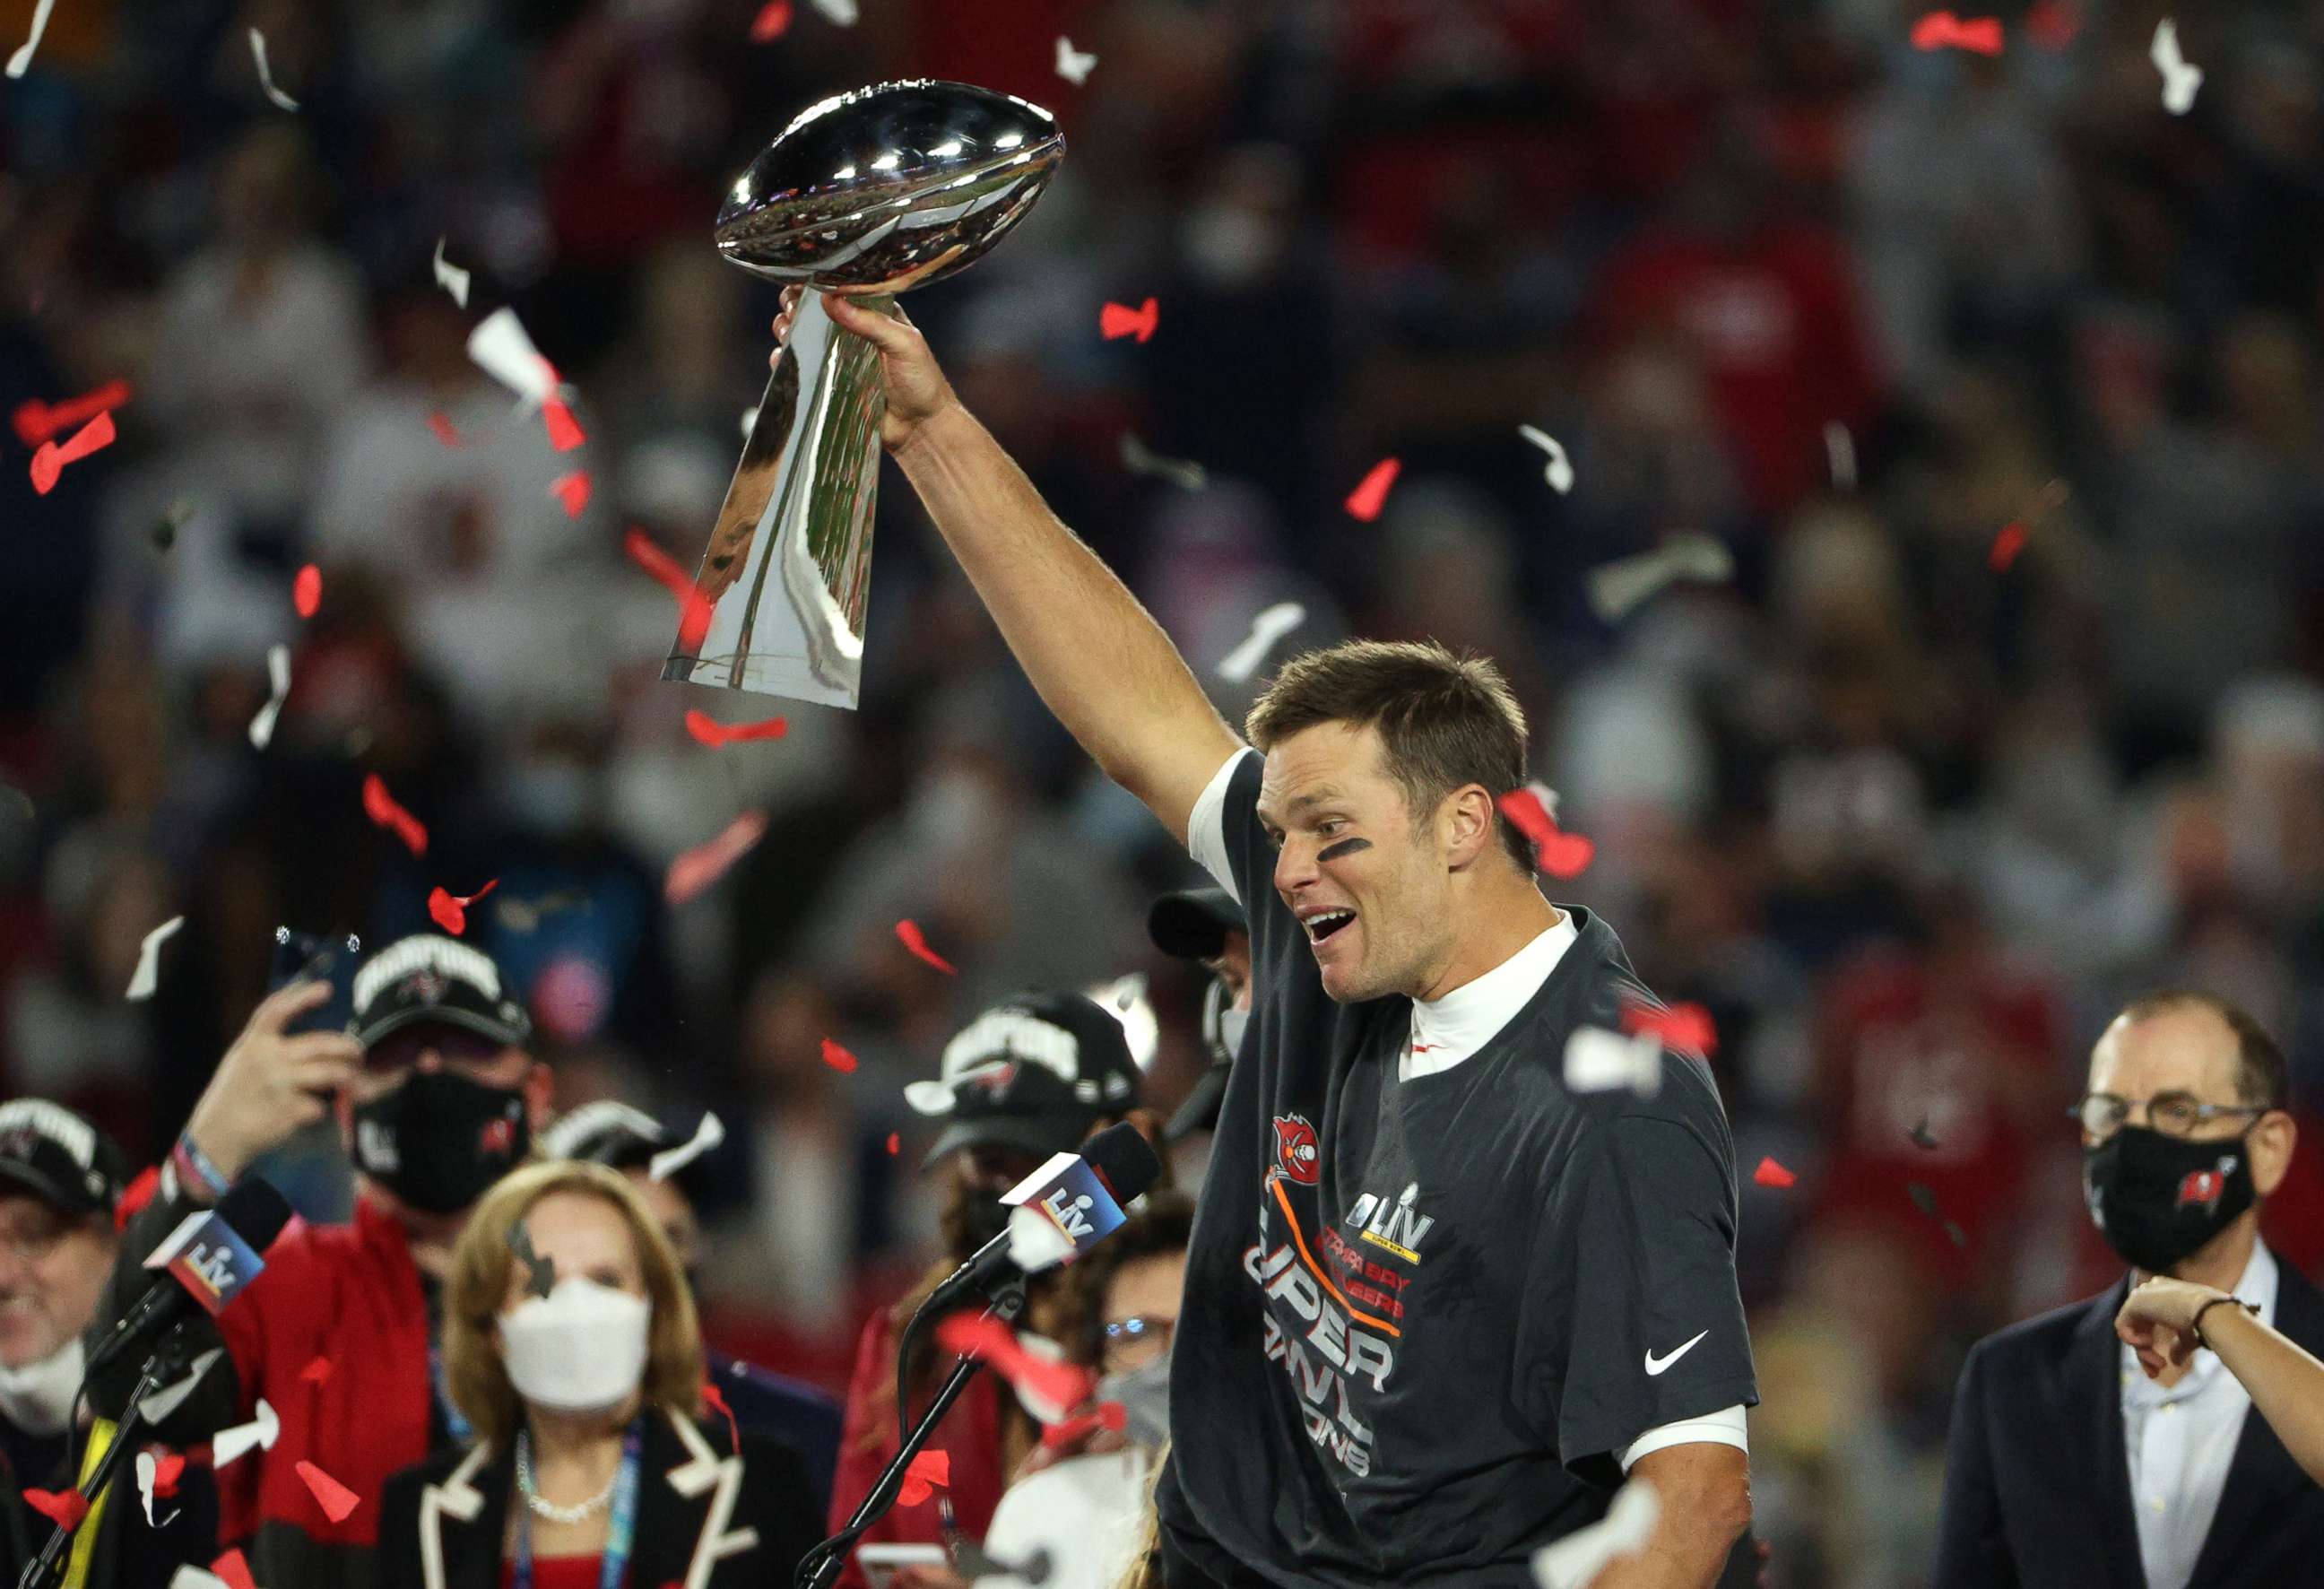 PHOTO: Tom Brady of the Tampa Bay Buccaneers hoists the Vince Lombardi Trophy after winning Super Bowl LV at Raymond James Stadium on Feb. 7, 2021 in Tampa, Fla.